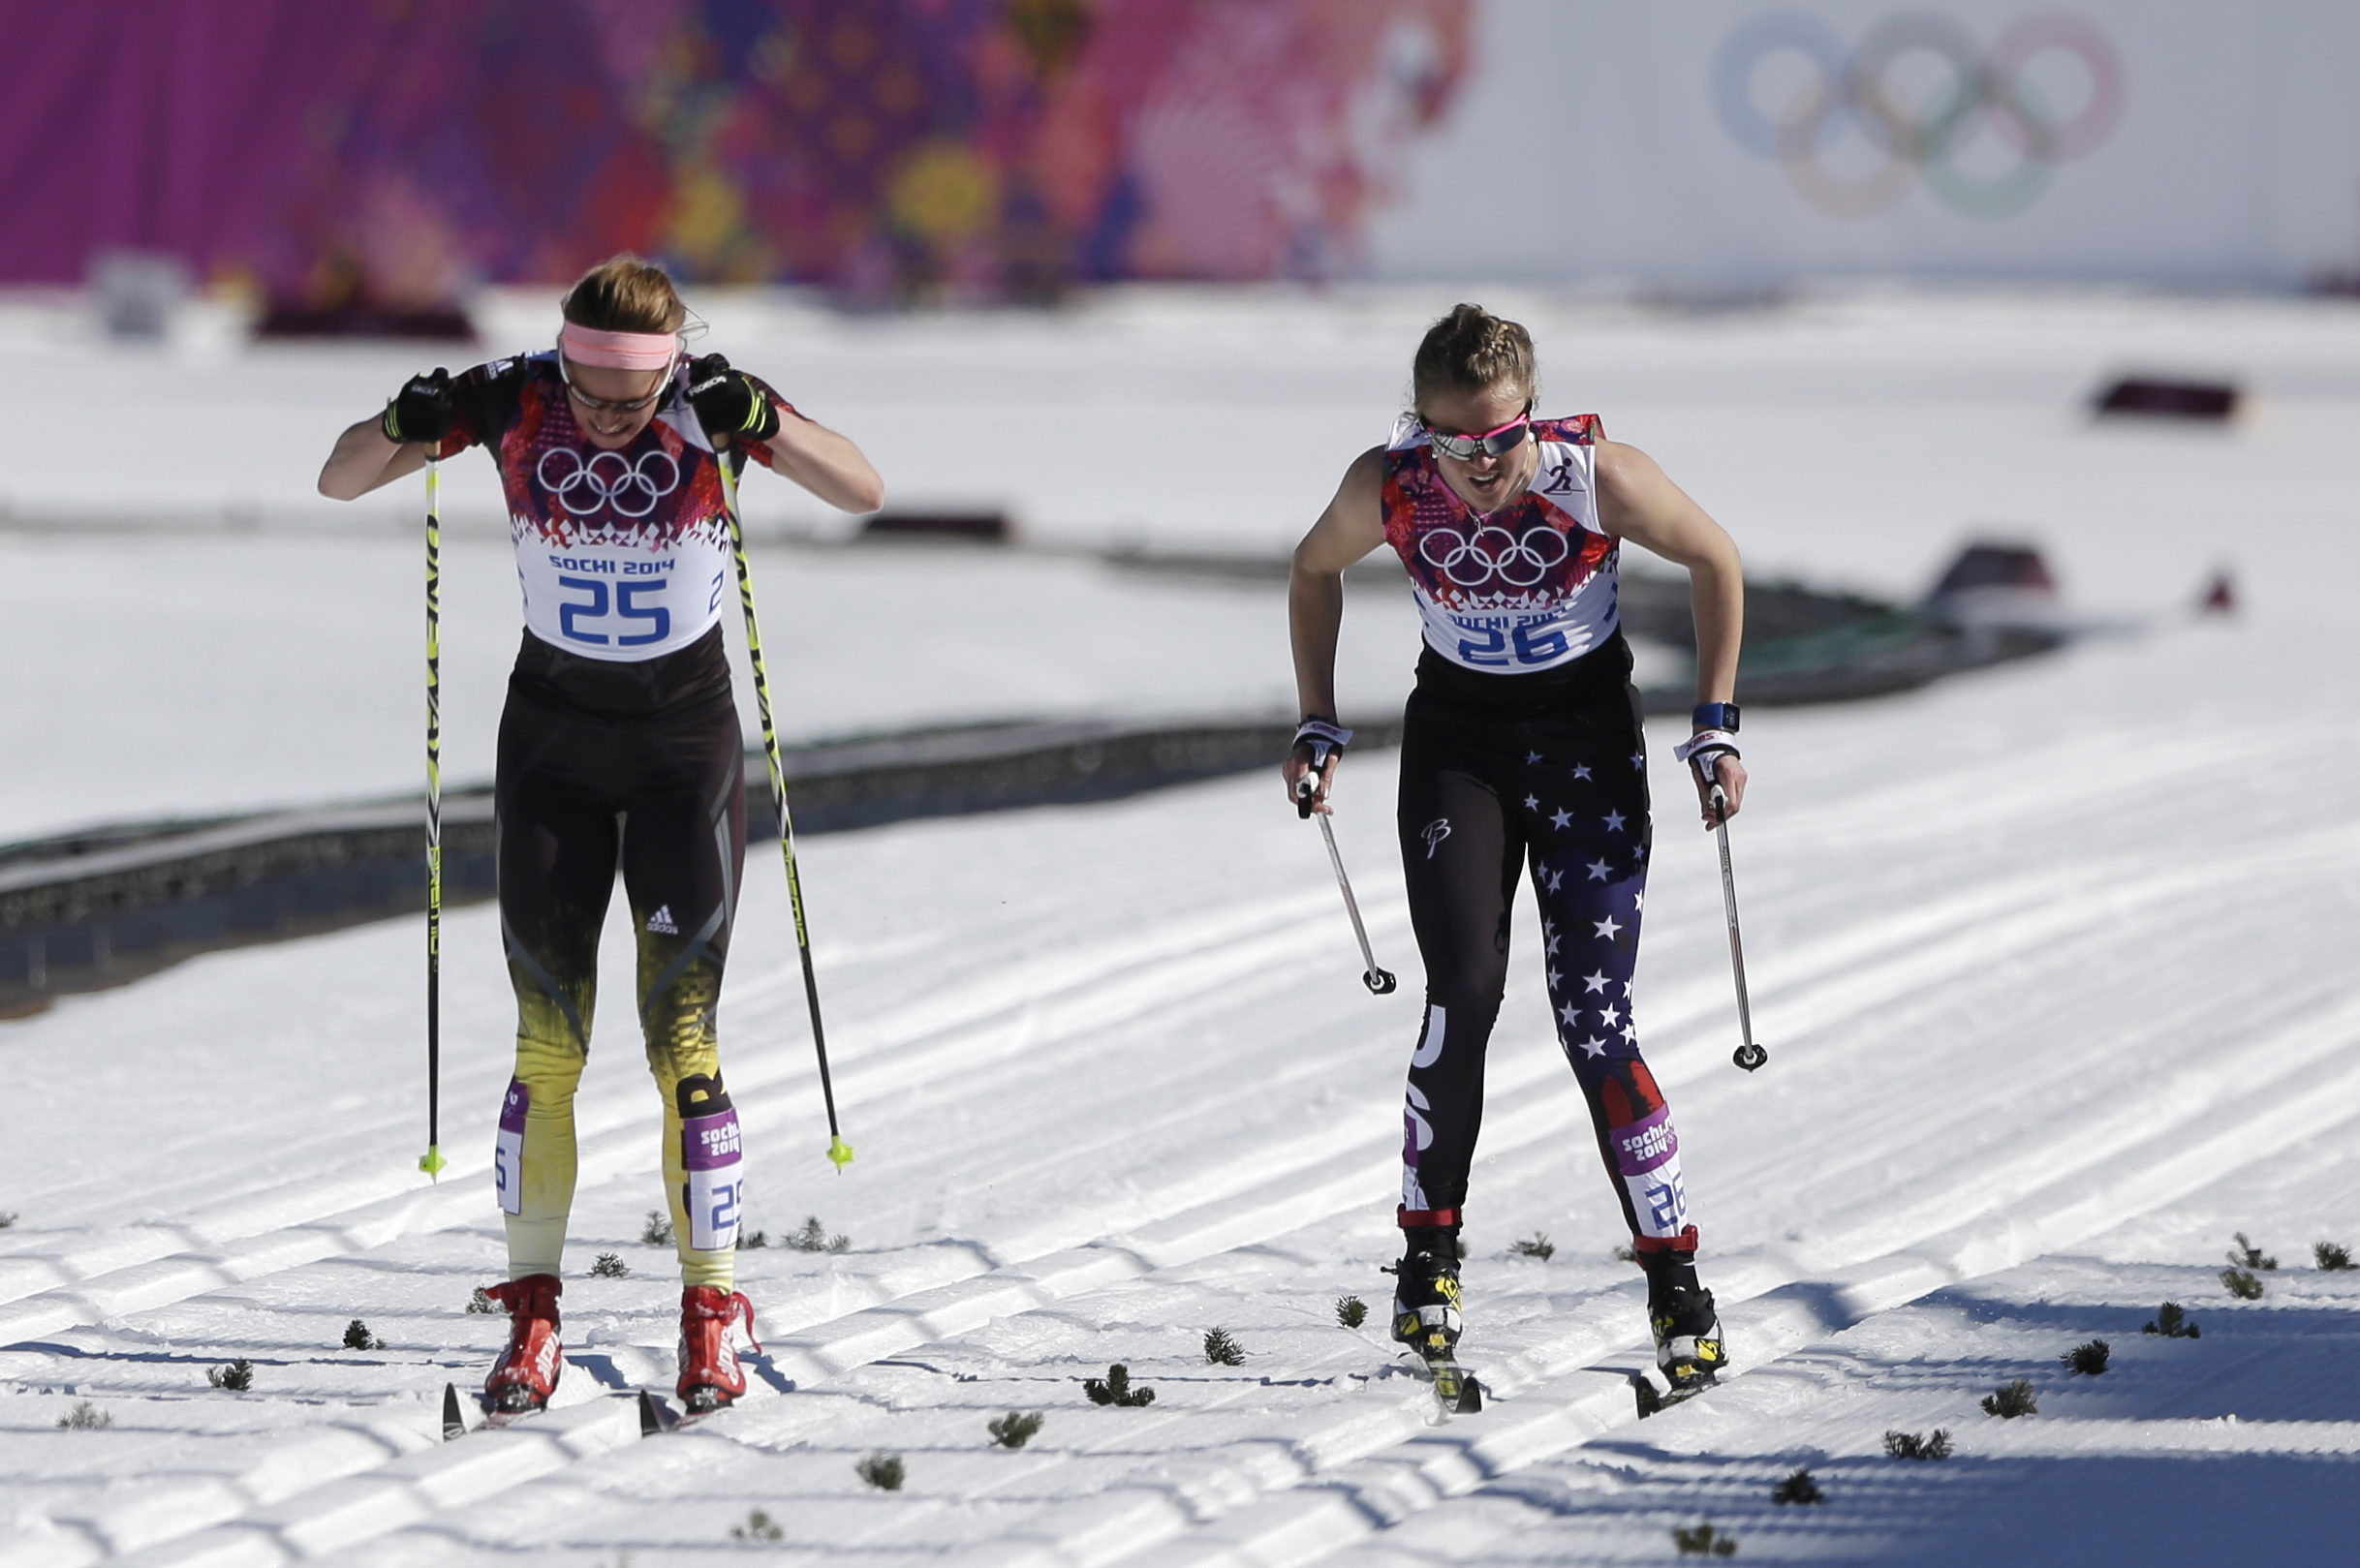 PHOTO: Germany's Nicole Fessel, left, and United States' Sadie Bjornsen ski on the finish straight during the women's 10K classical-style cross-country race at the 2014 Winter Olympics, Feb. 13, 2014, in Krasnaya Polyana, Russia